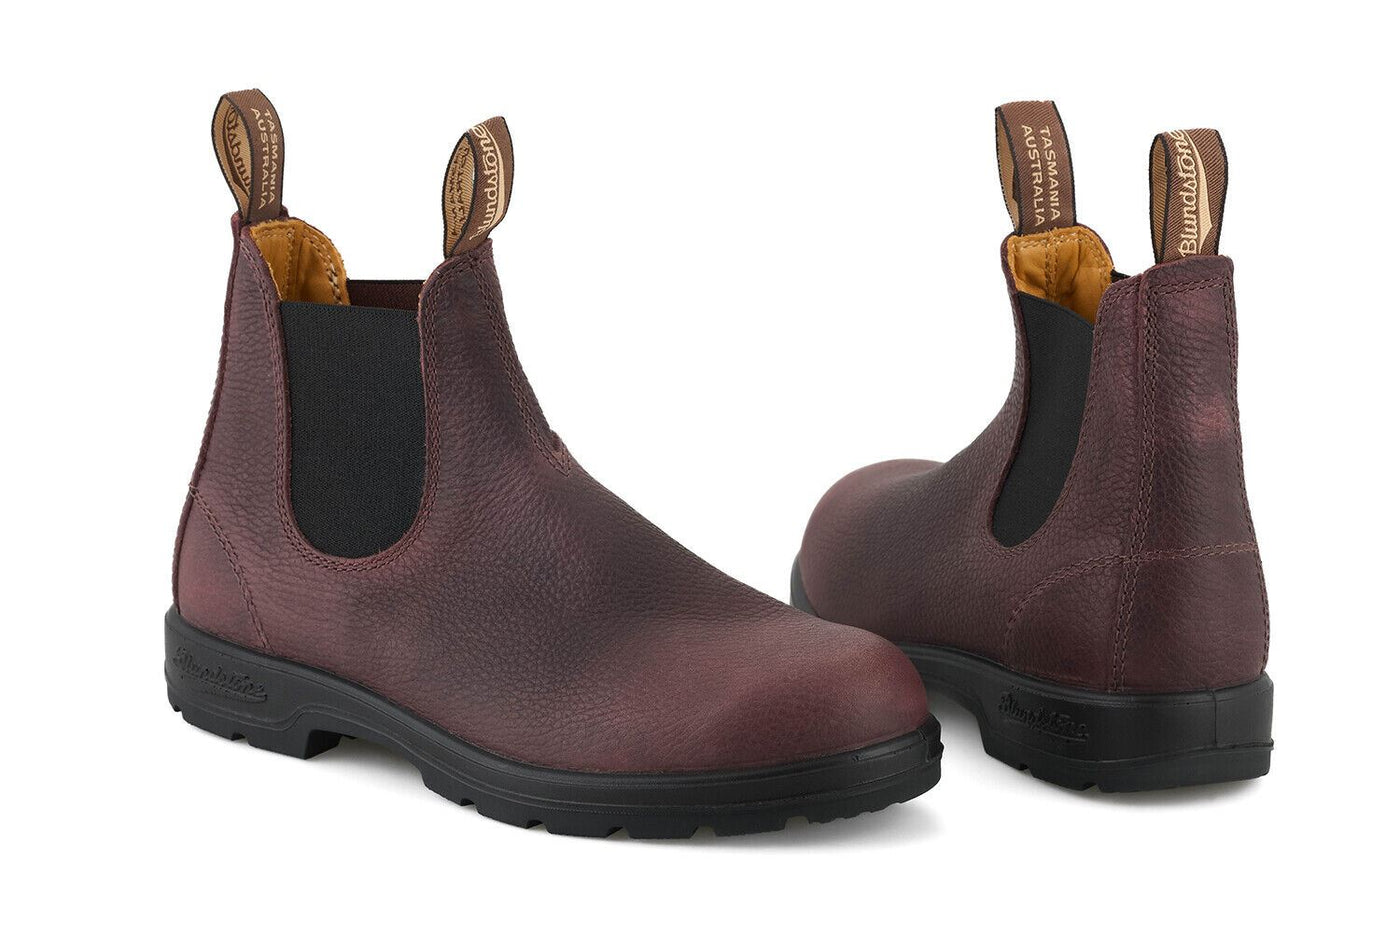 Blundstone #2247 Mesquite Brown Leather Chelsea Boot